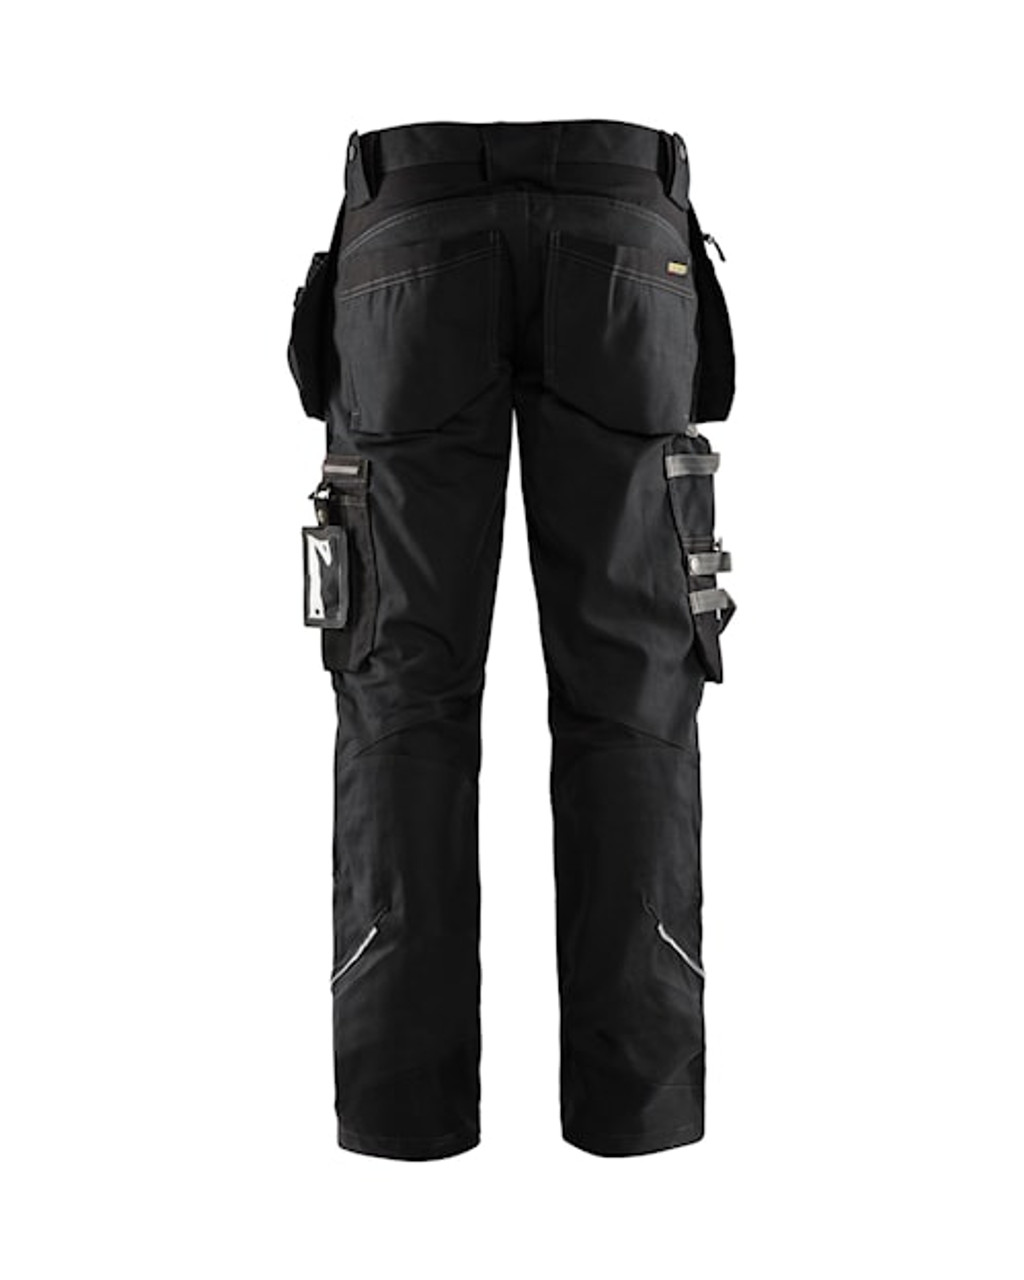 BLAKLADER  Trousers | Craftsman Hardware supplies Construction Jobs, Canvas + Stretch Craftsman Trousers with Holster Pockets for Mens Workwear and Plumbers